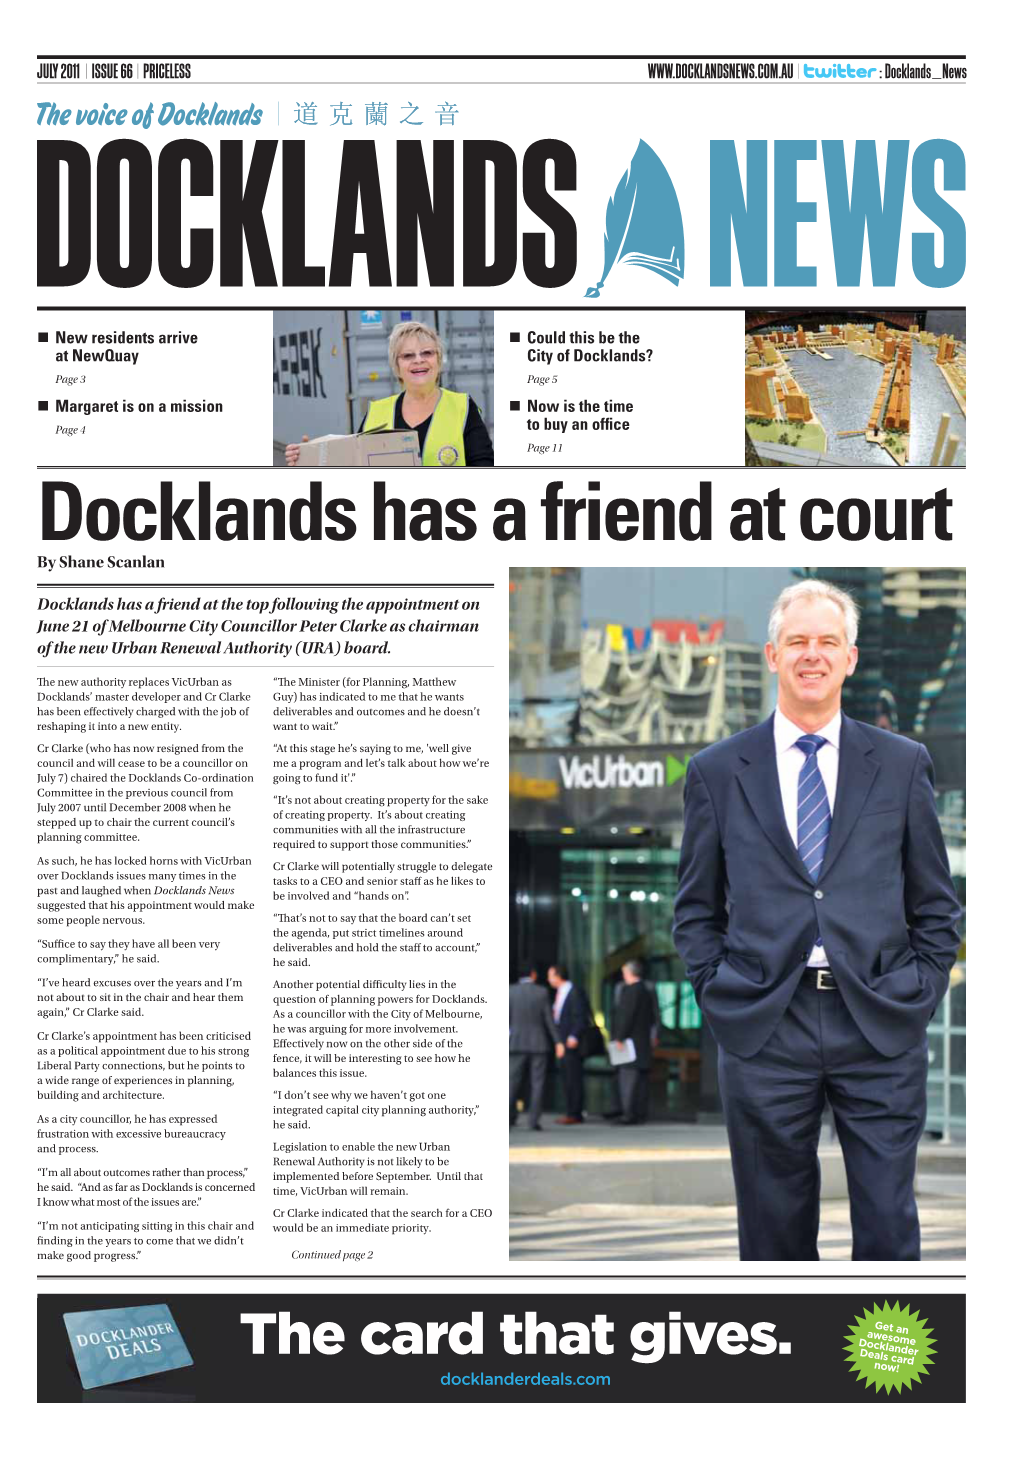 Docklands Has a Friend at Court by Shane Scanlan